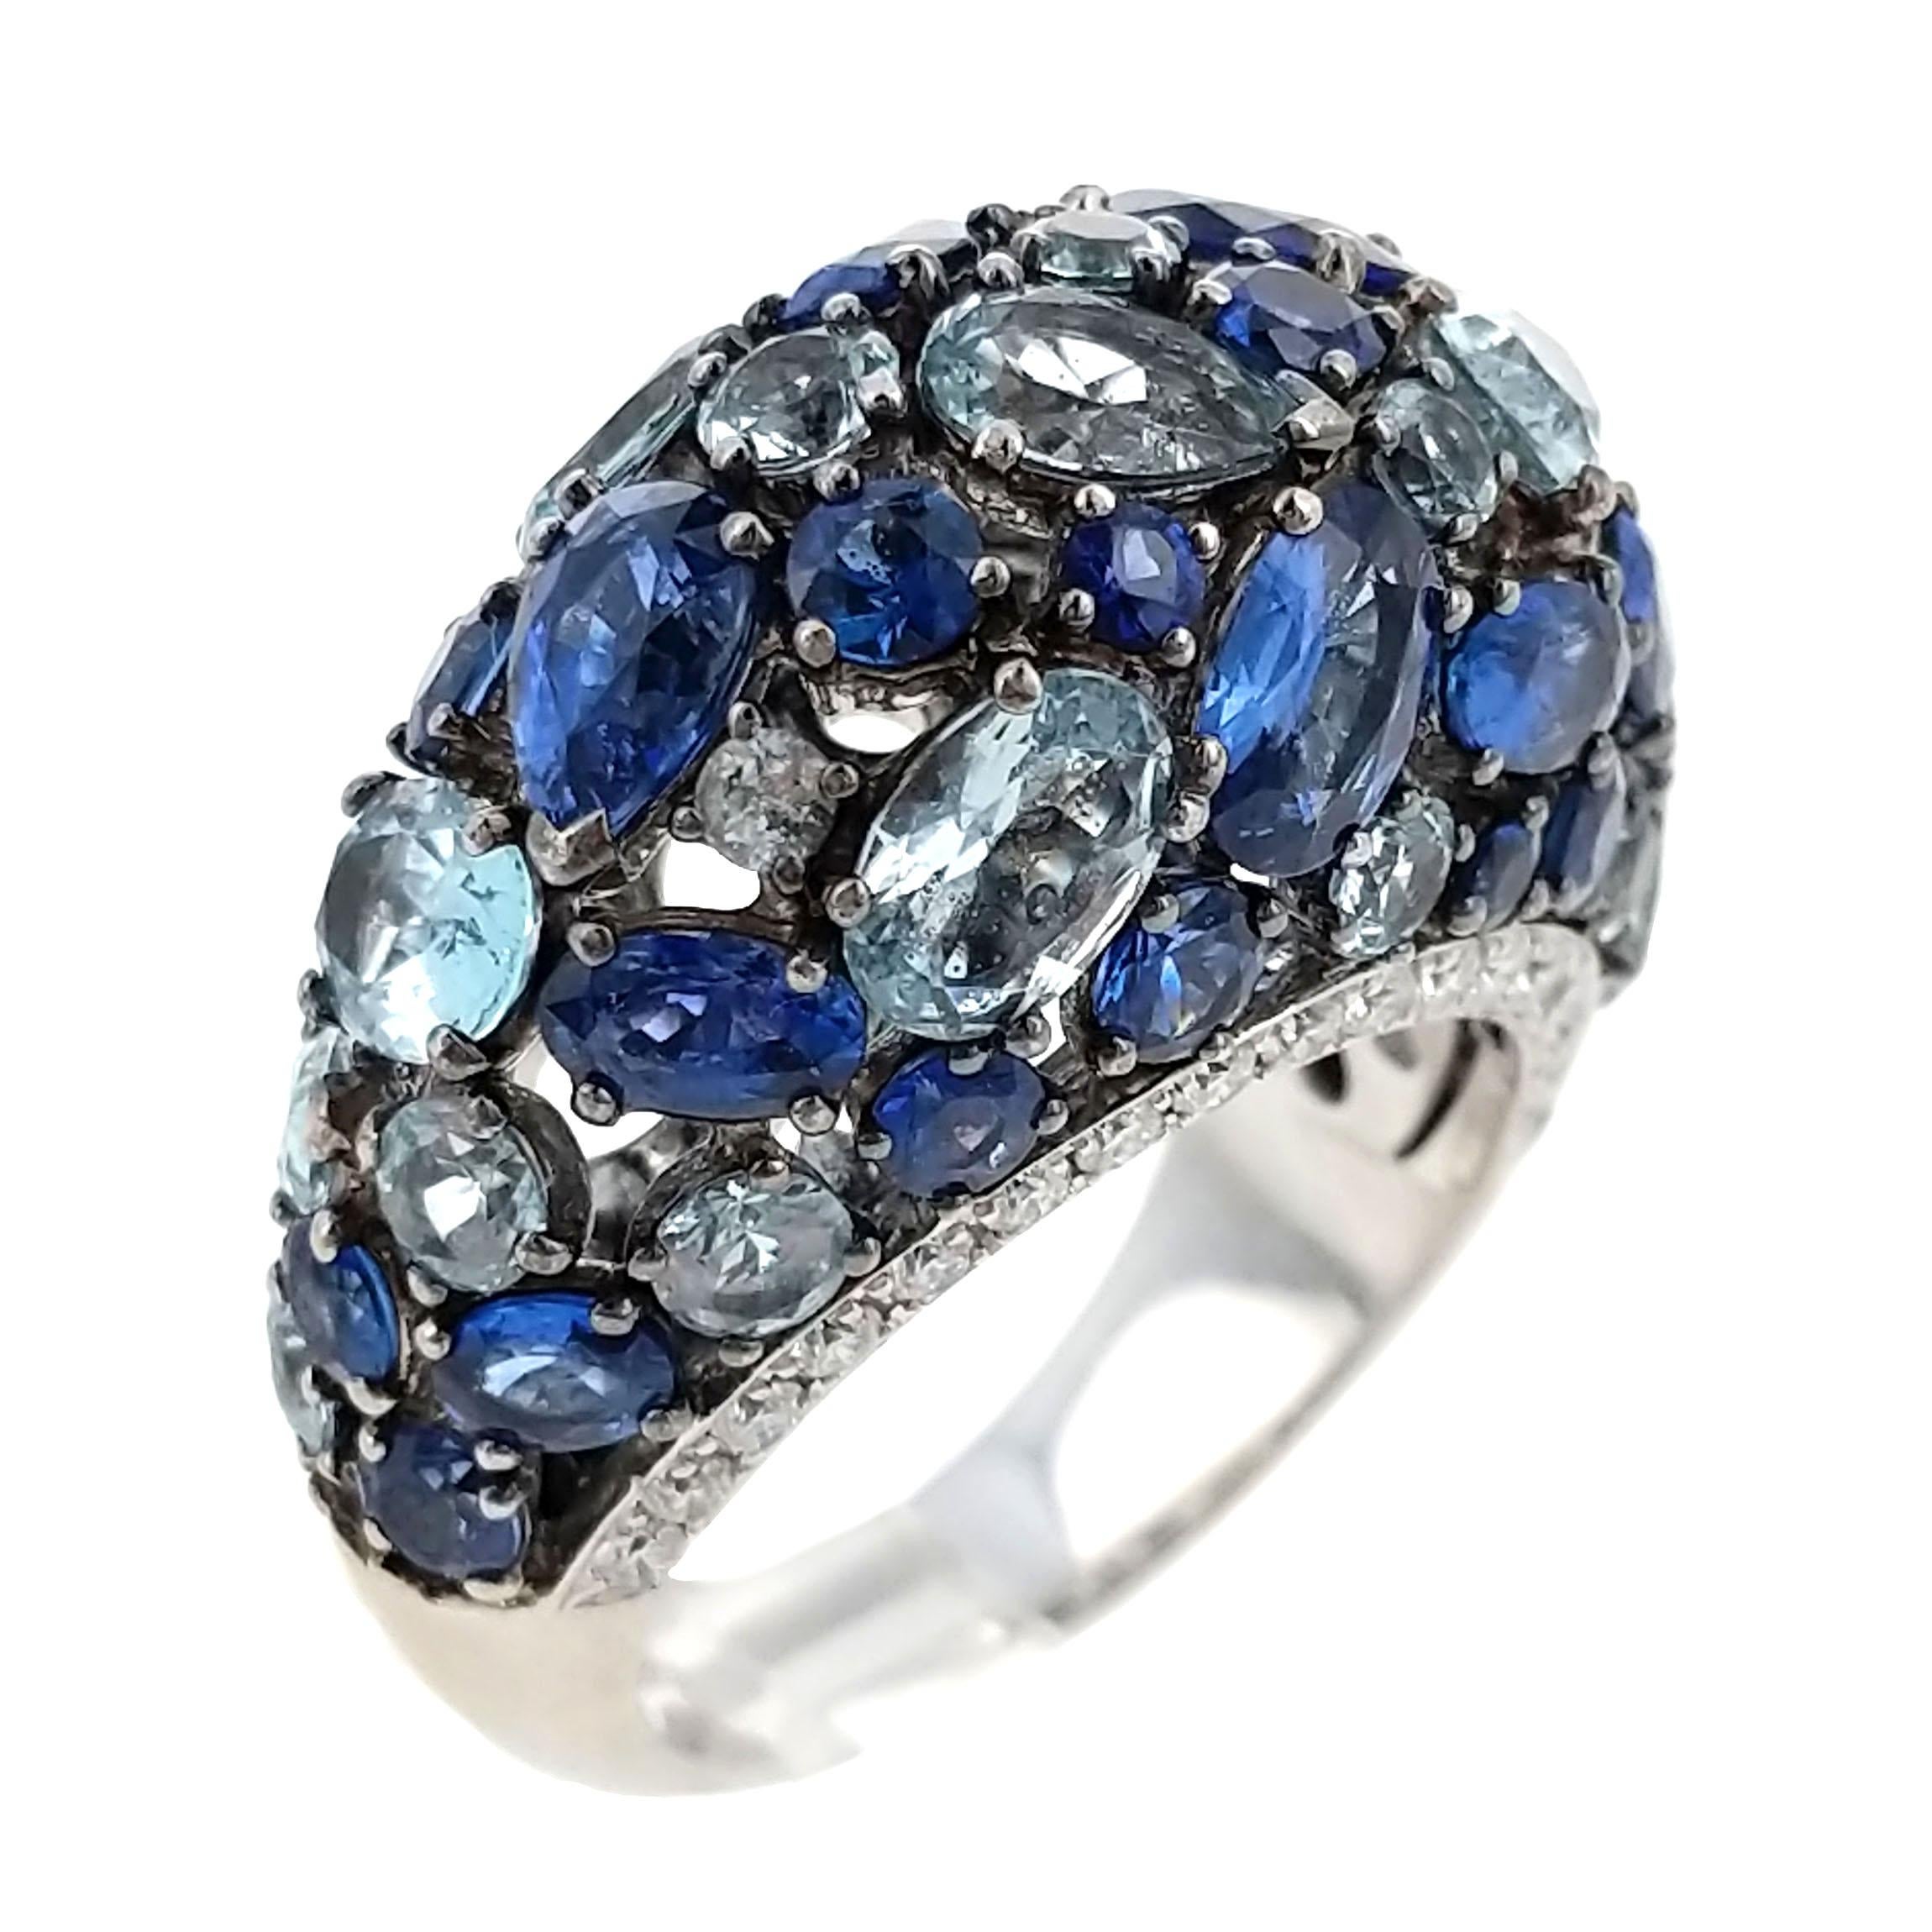 A bombé ring set openwork with oval- and round-shaped sapphires and pear-shaped light blue topazes bordered by brilliant-cut diamonds, mounted in 18k white gold. Stamped CB for Carl Bucherer, Swiss. Size 7.25.

* More photos by request
* FREE